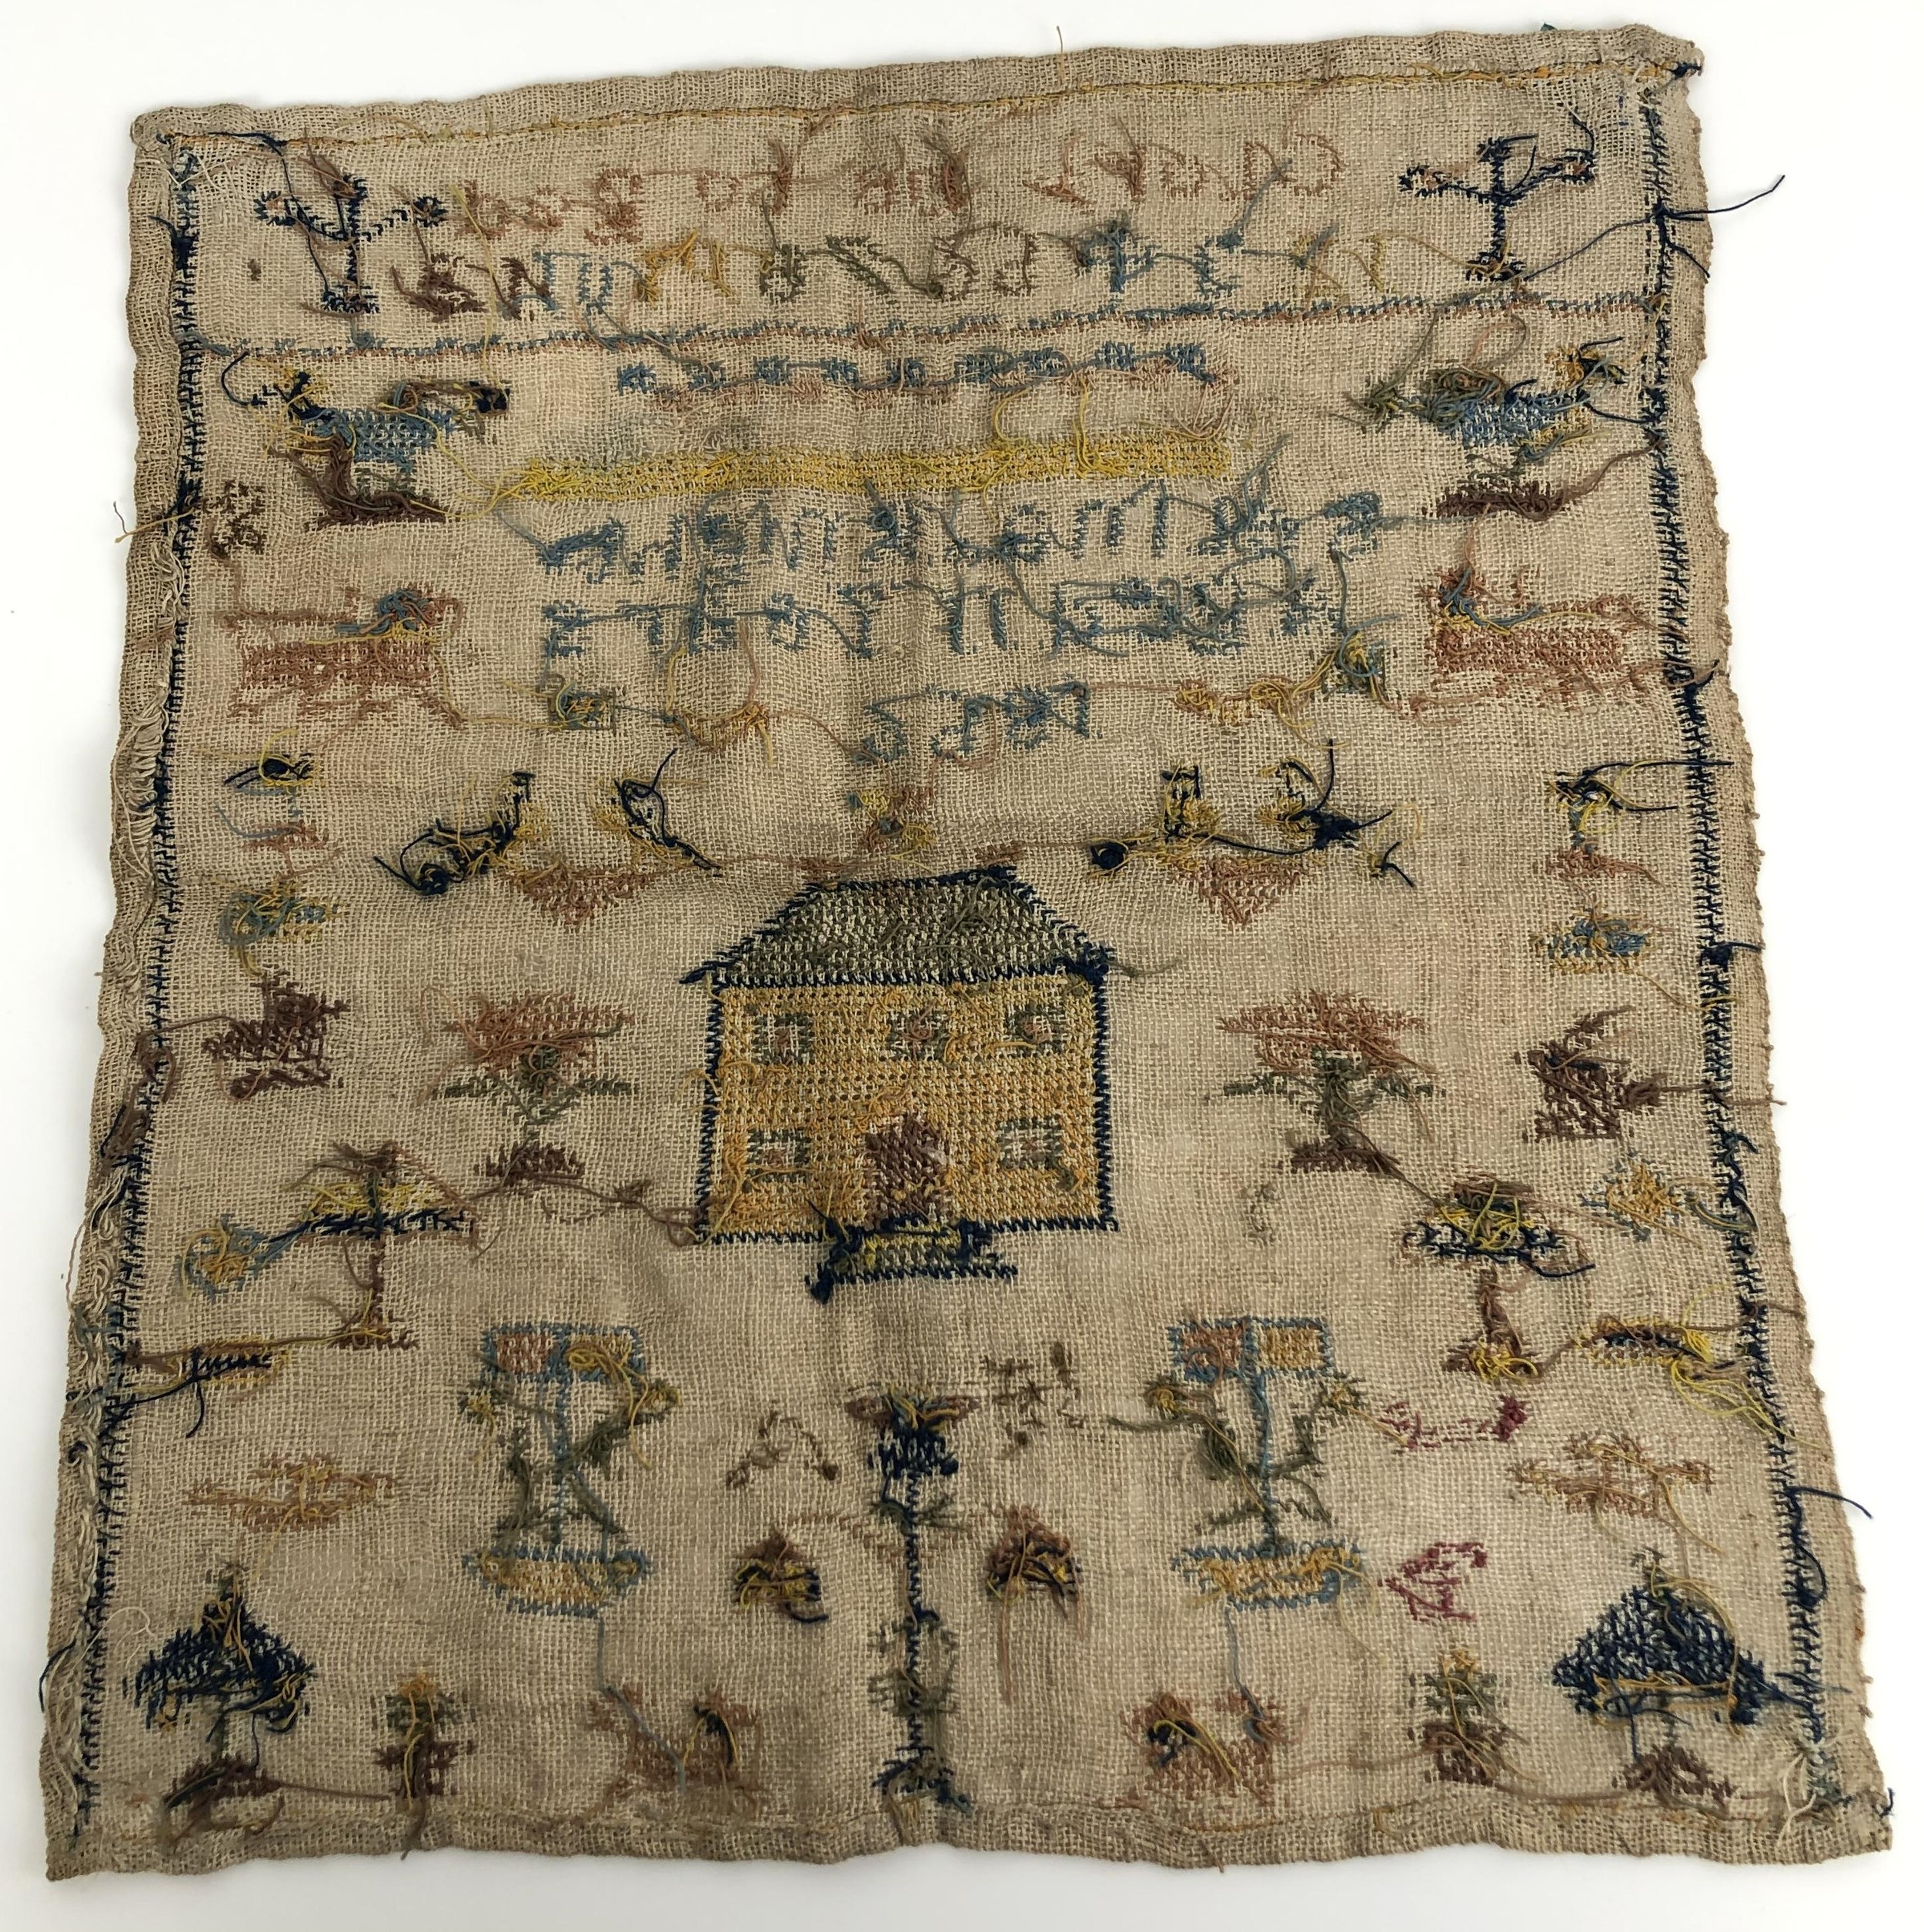 A 19th century sampler, signed Selina Knight, aged 11, dated 1856, 35 x 33 cm - Image 2 of 2